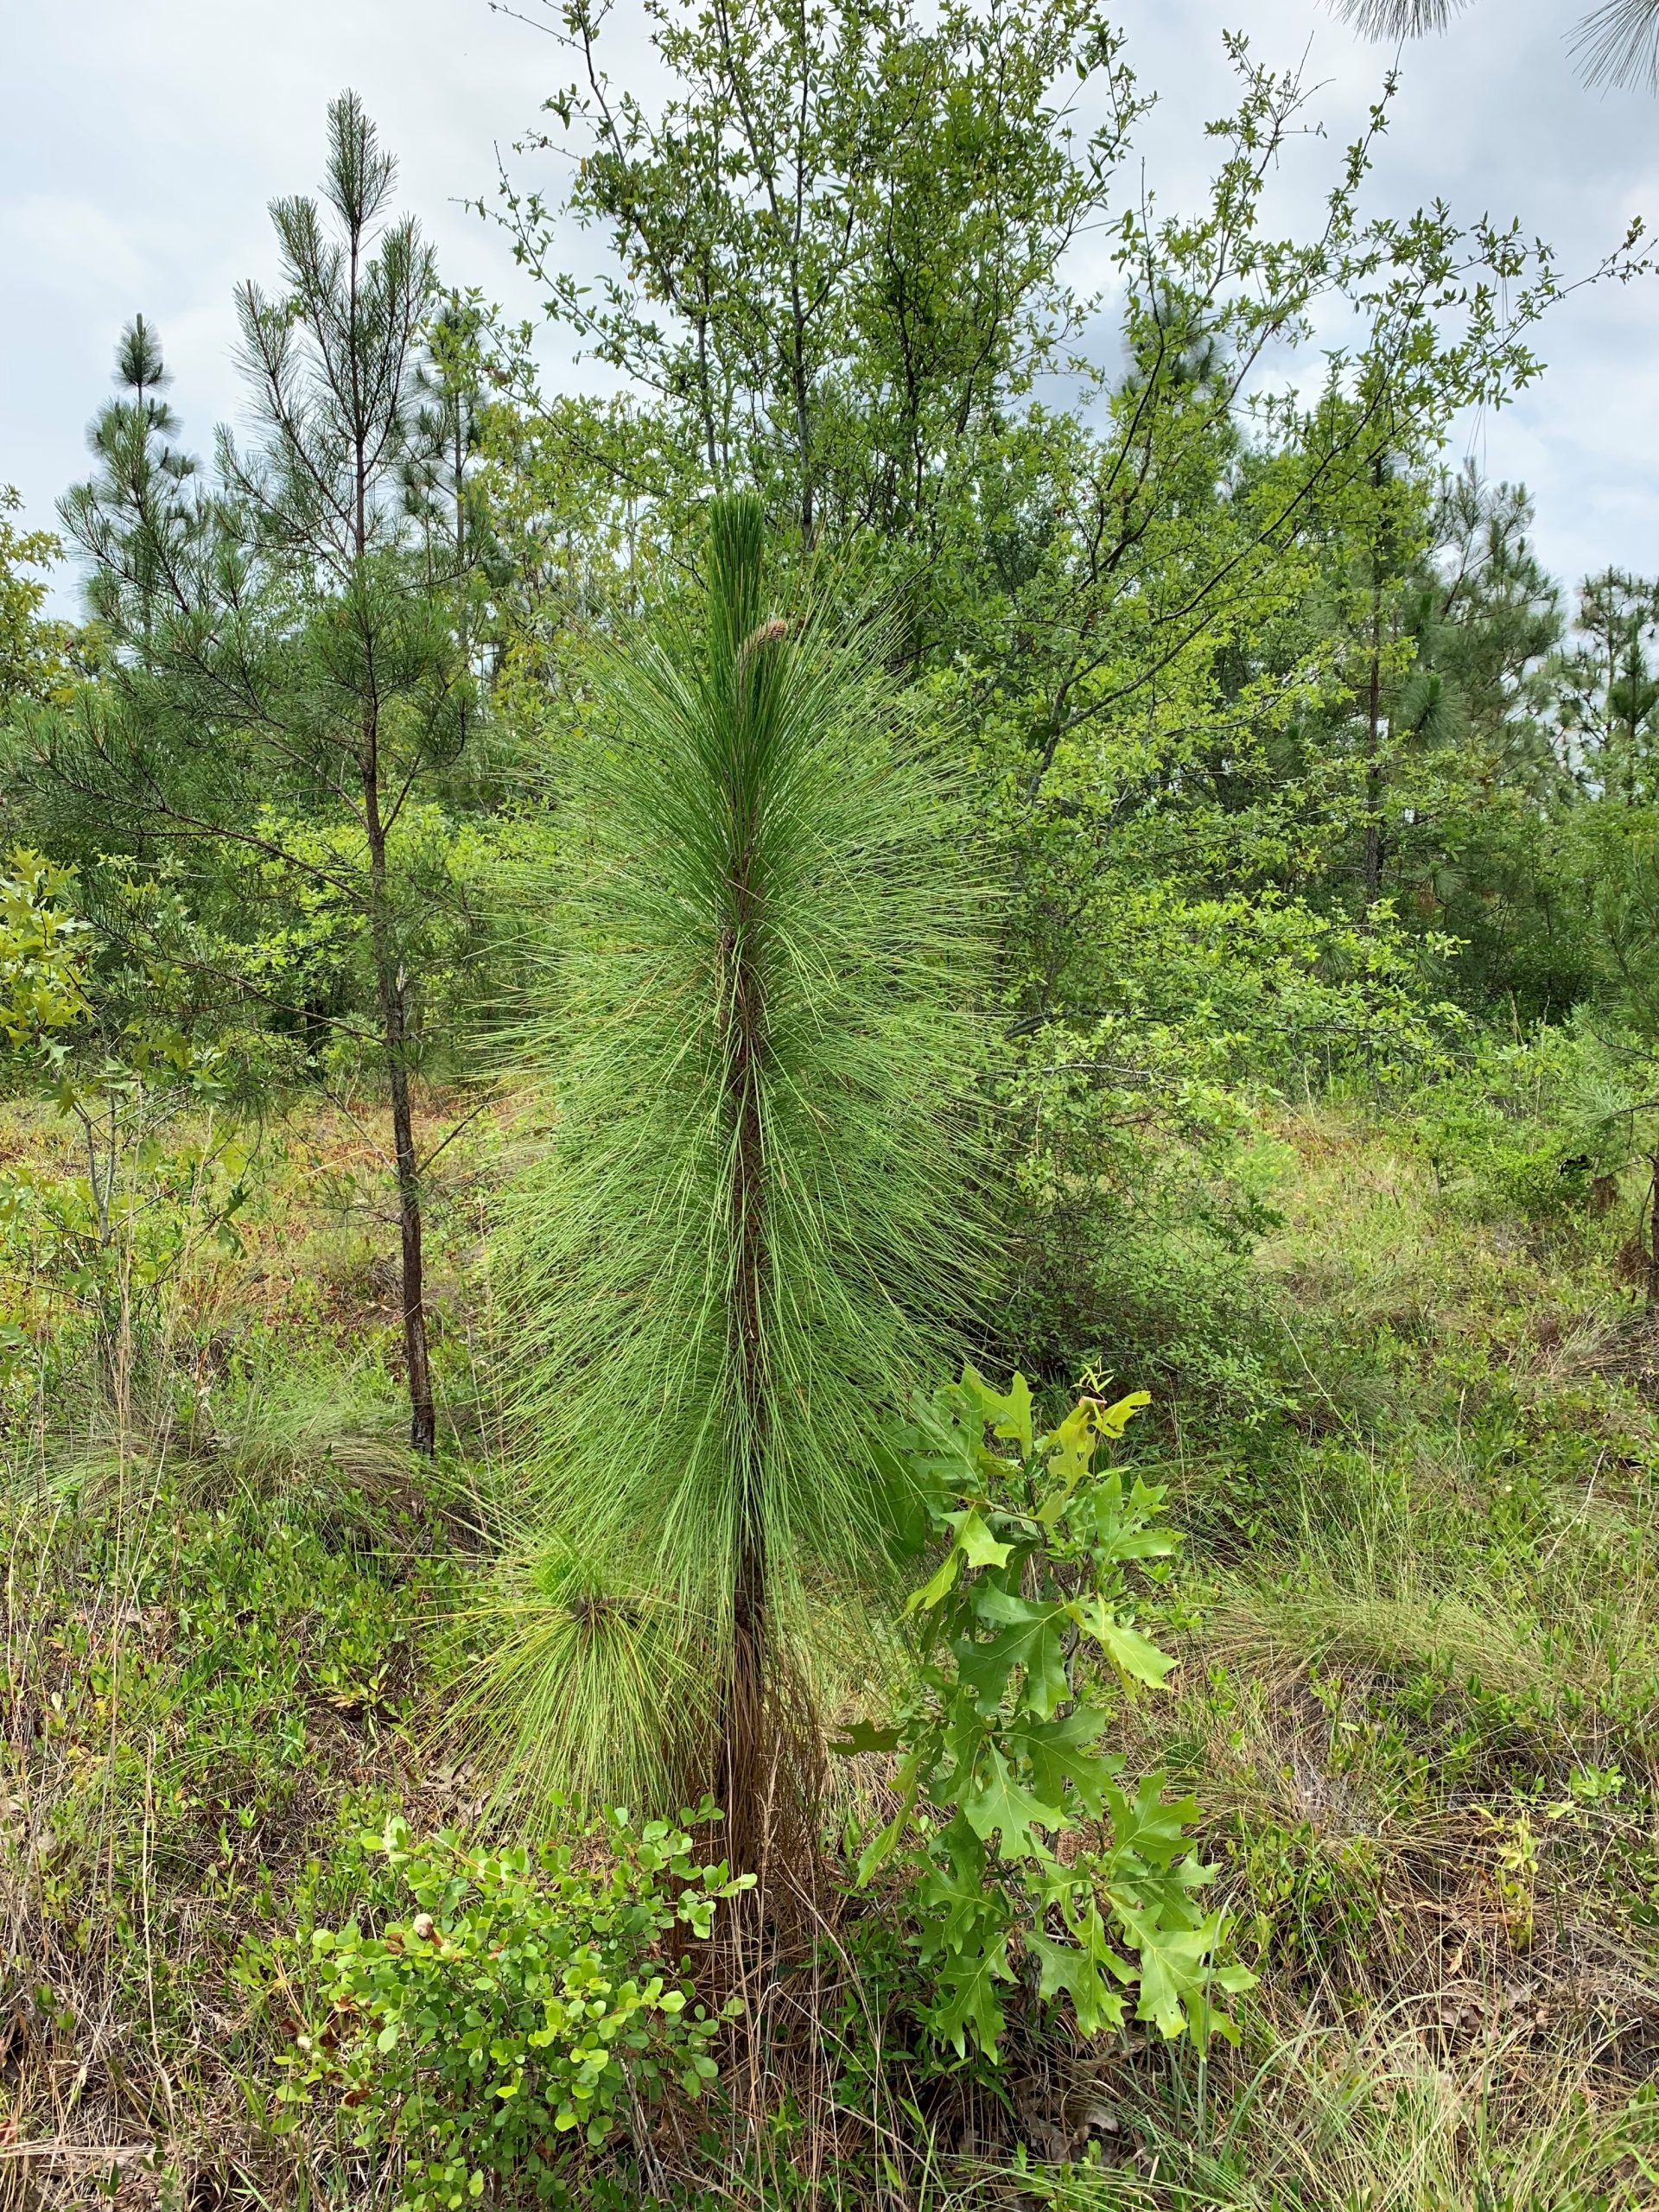 green pine needles expand from a dark brown thin trunk with many other trees surrounding the main focal one